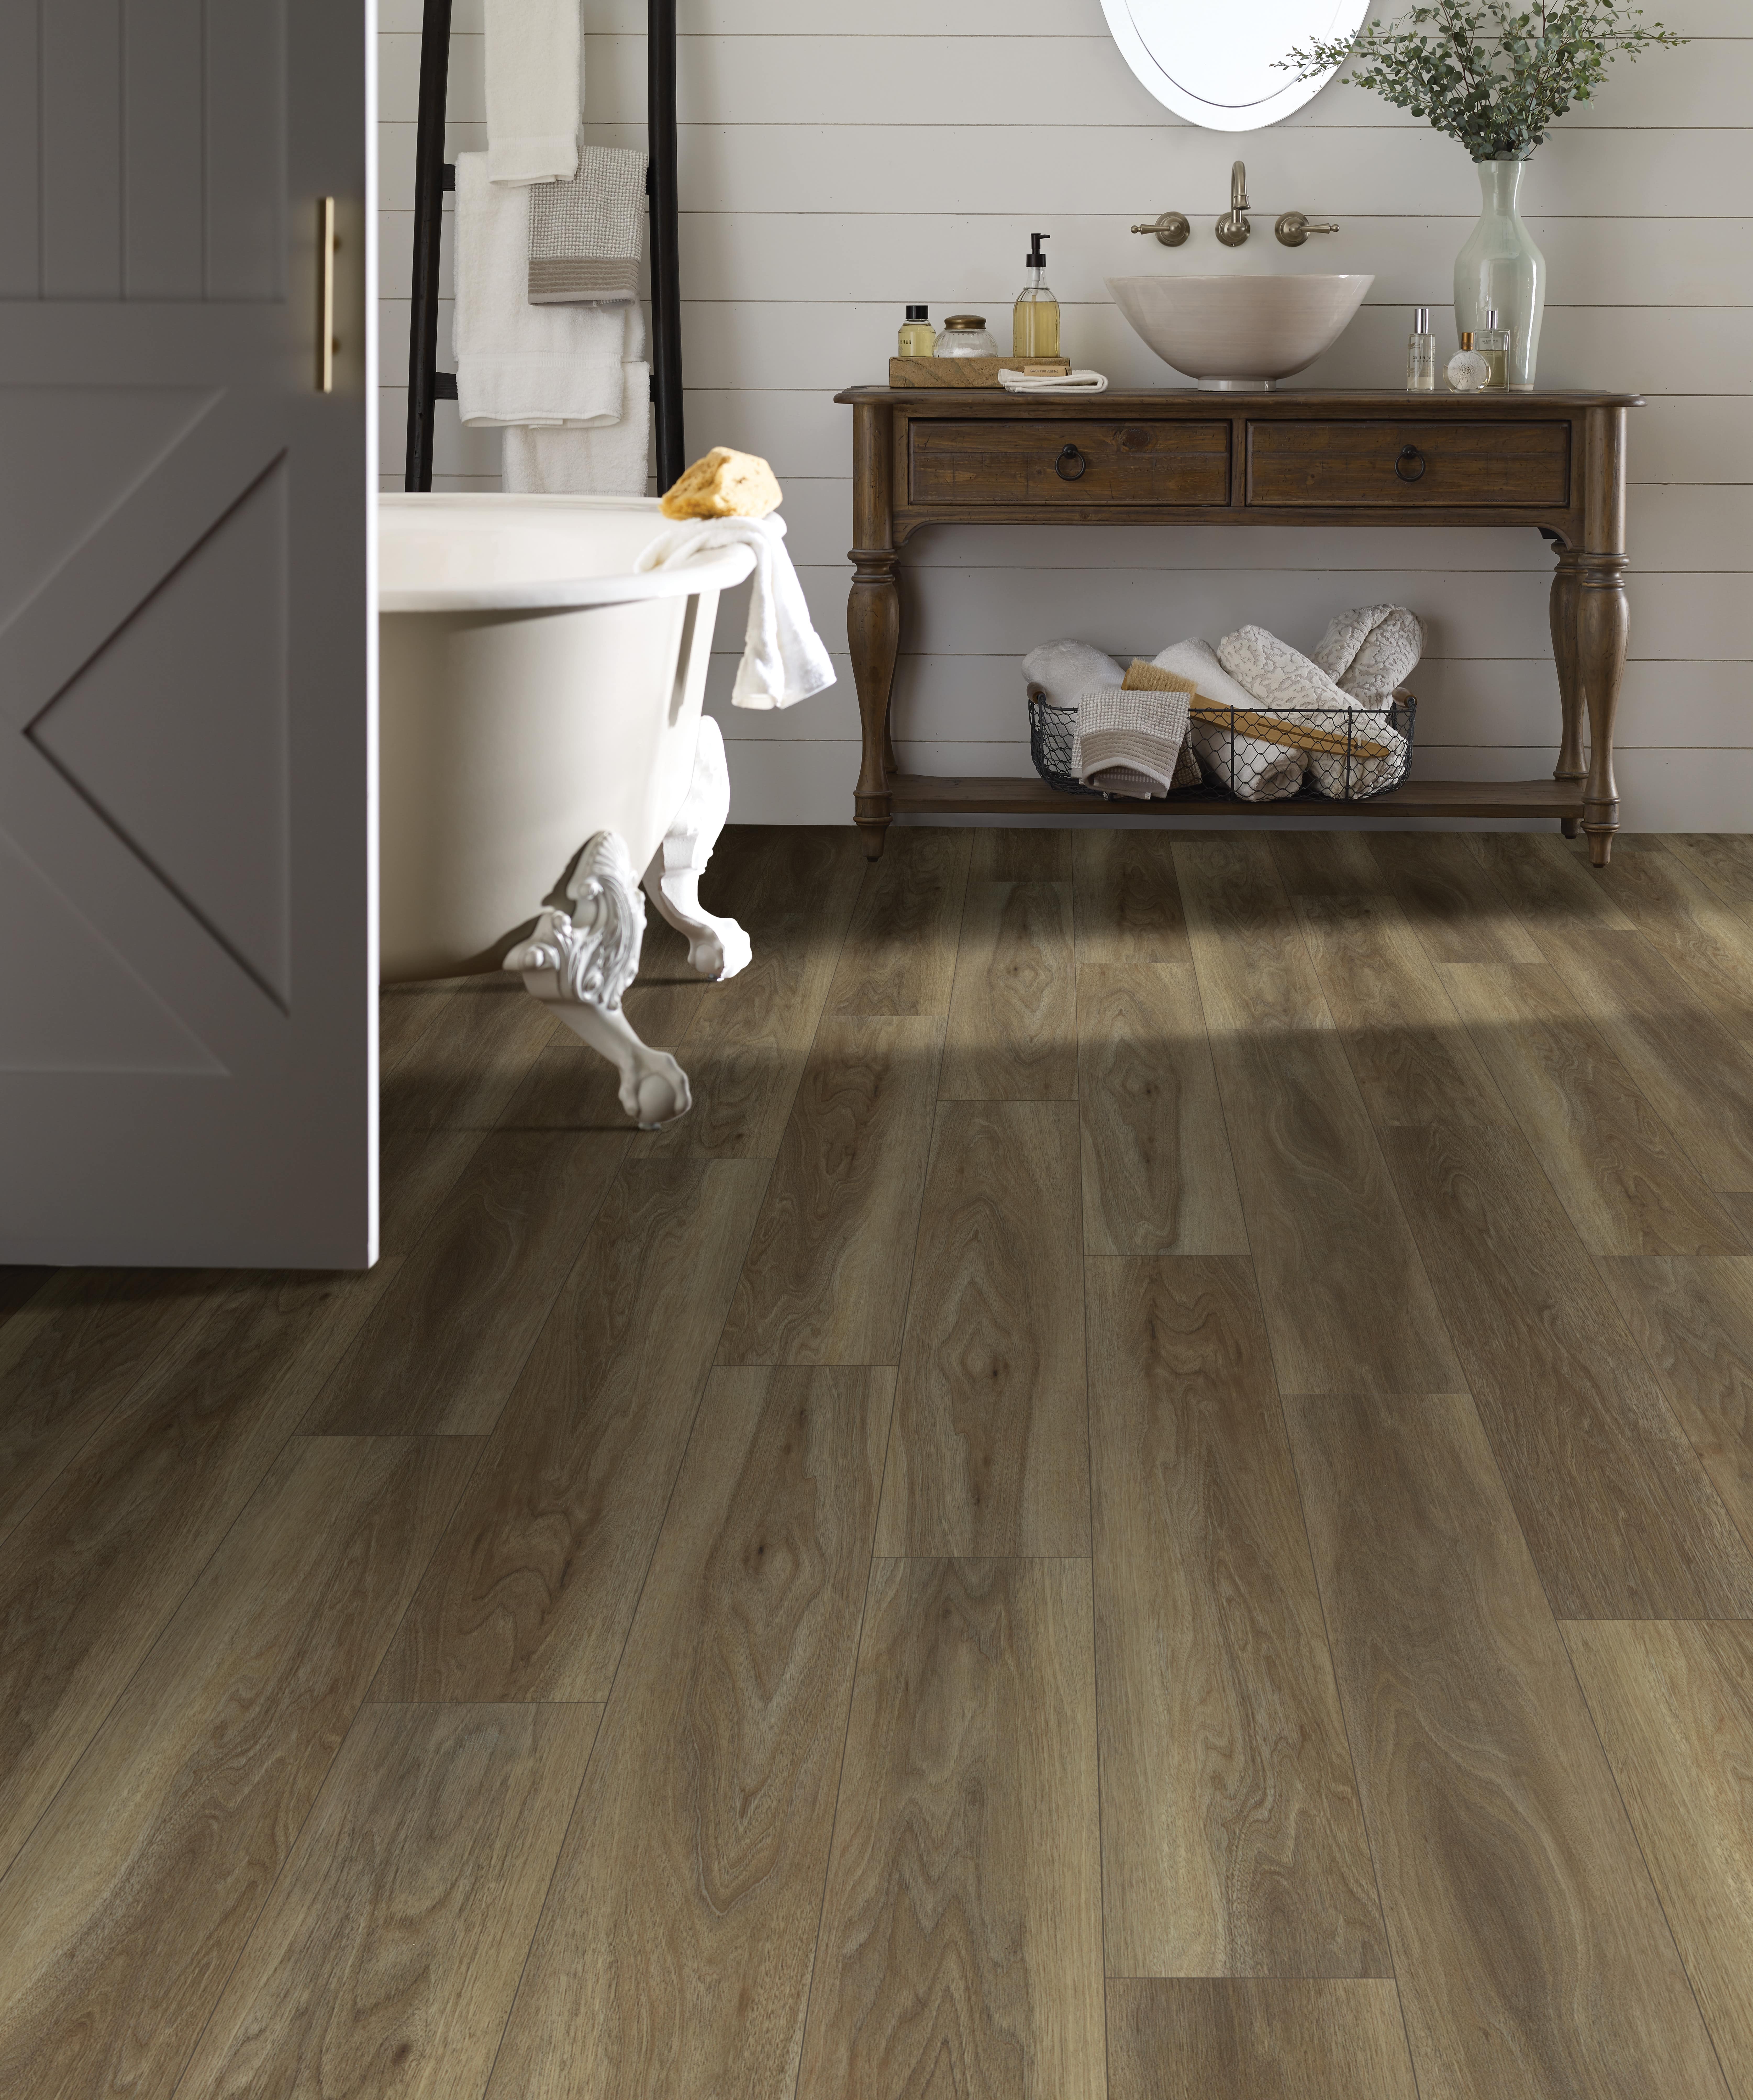 Wood Floor Bathrooms How To Do Them, Is It Safe To Put Laminate Flooring In A Bathroom